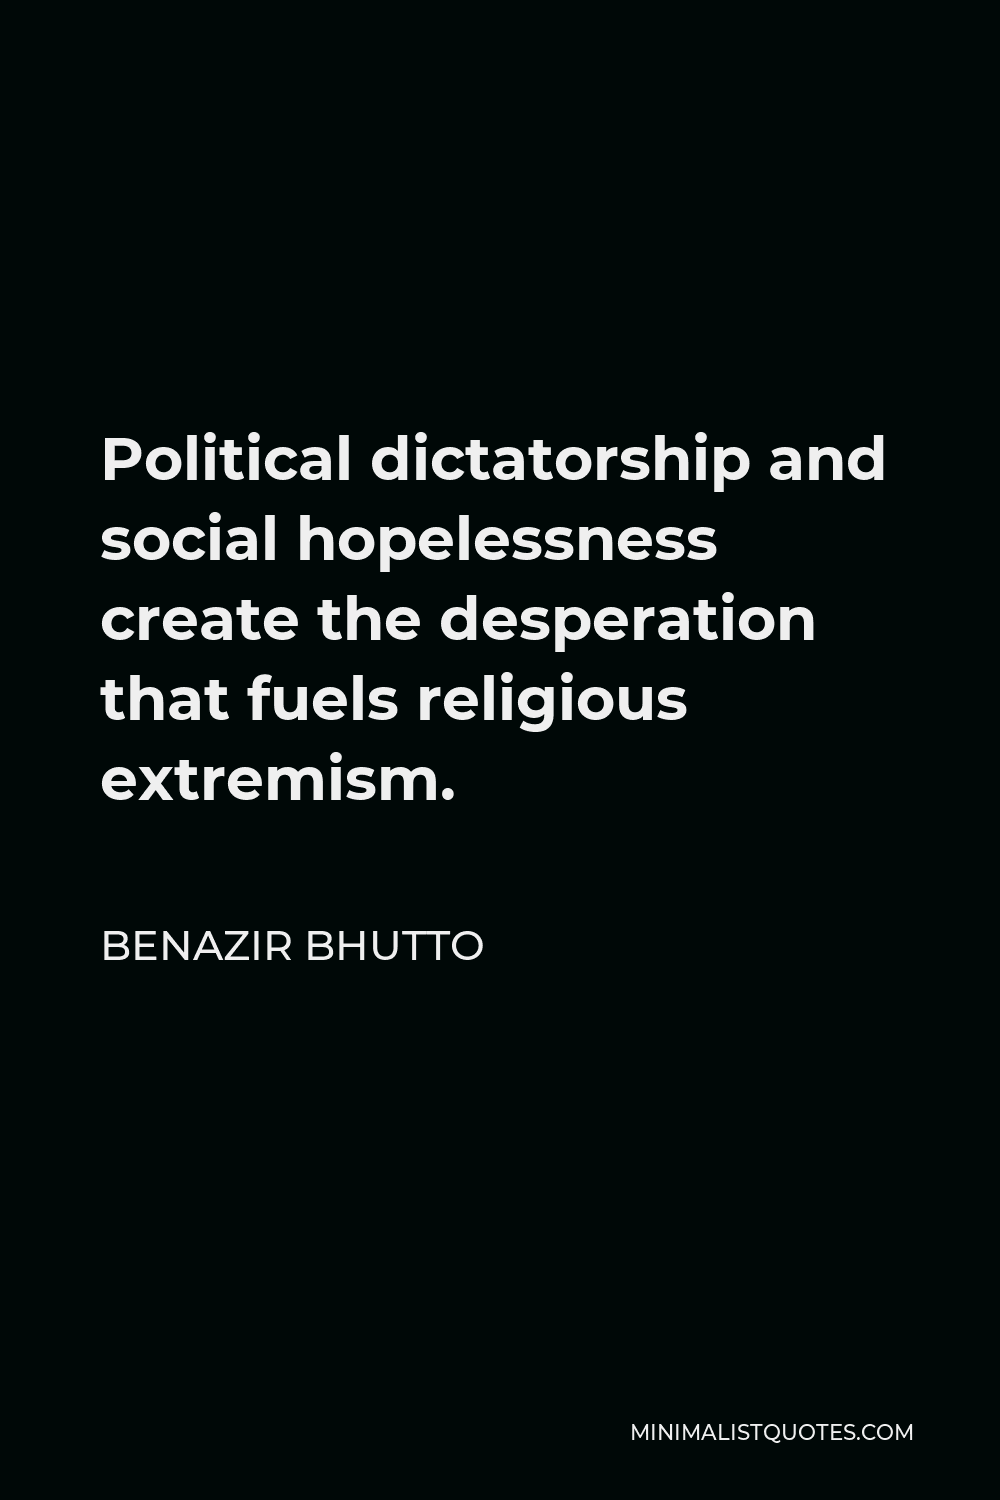 Benazir Bhutto Quote - Political dictatorship and social hopelessness create the desperation that fuels religious extremism.